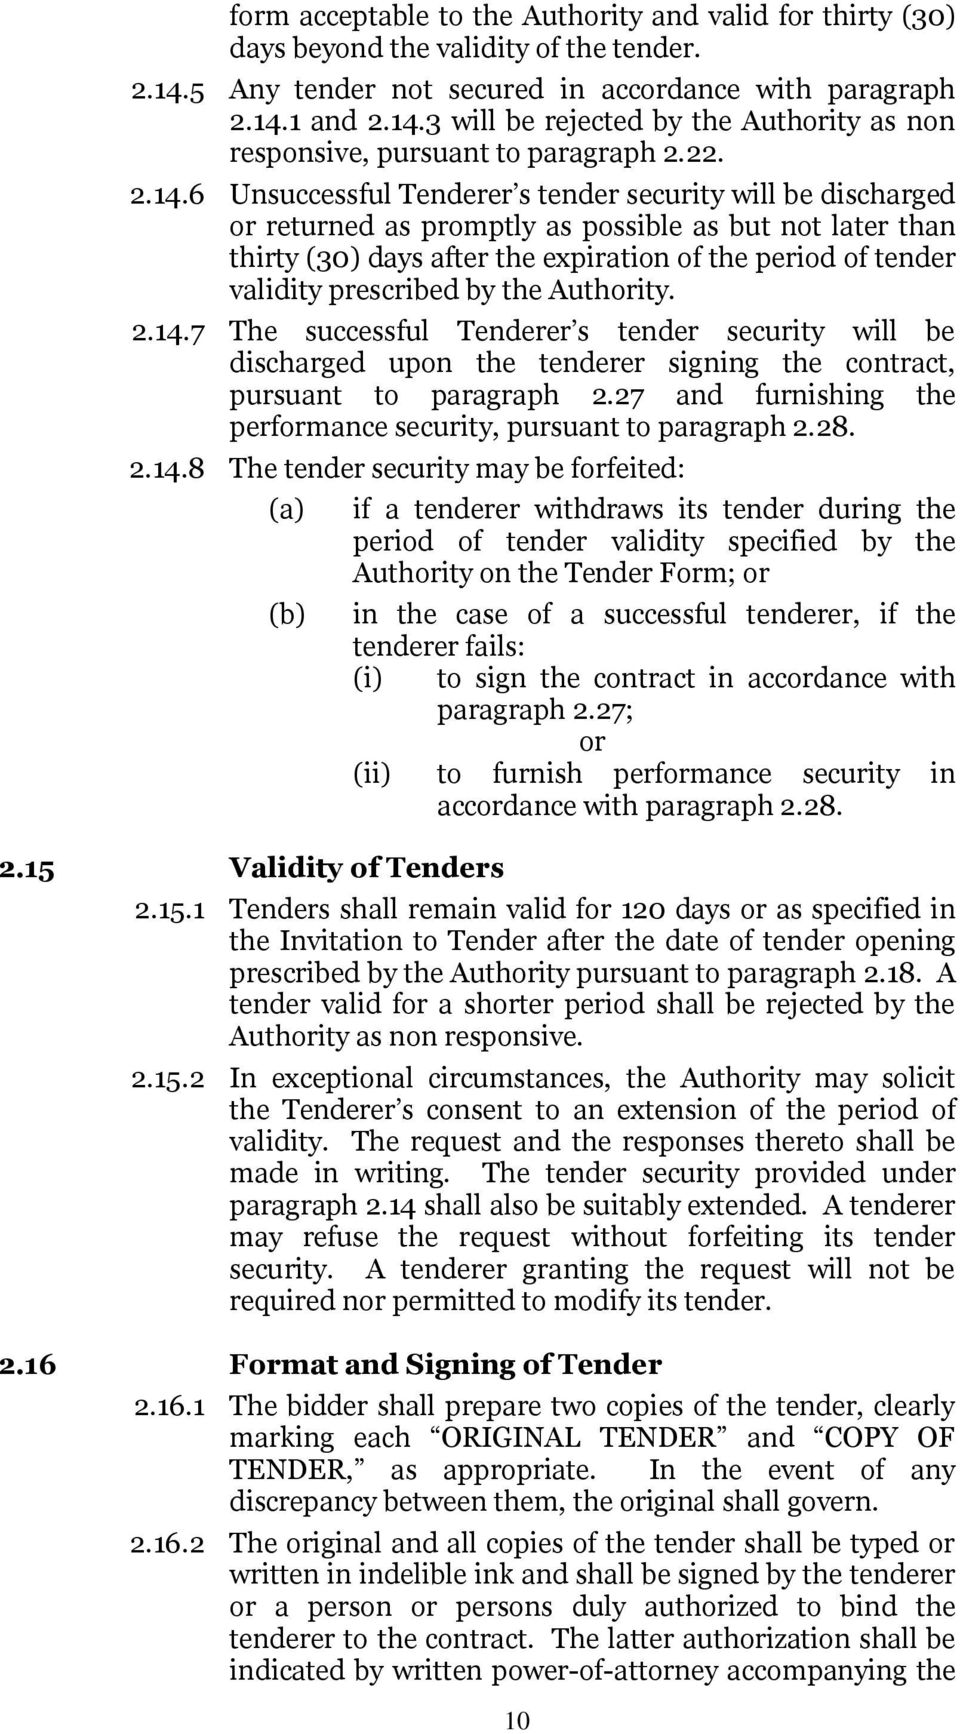 6 Unsuccessful Tenderer s tender security will be discharged or returned as promptly as possible as but not later than thirty (30) days after the expiration of the period of tender validity